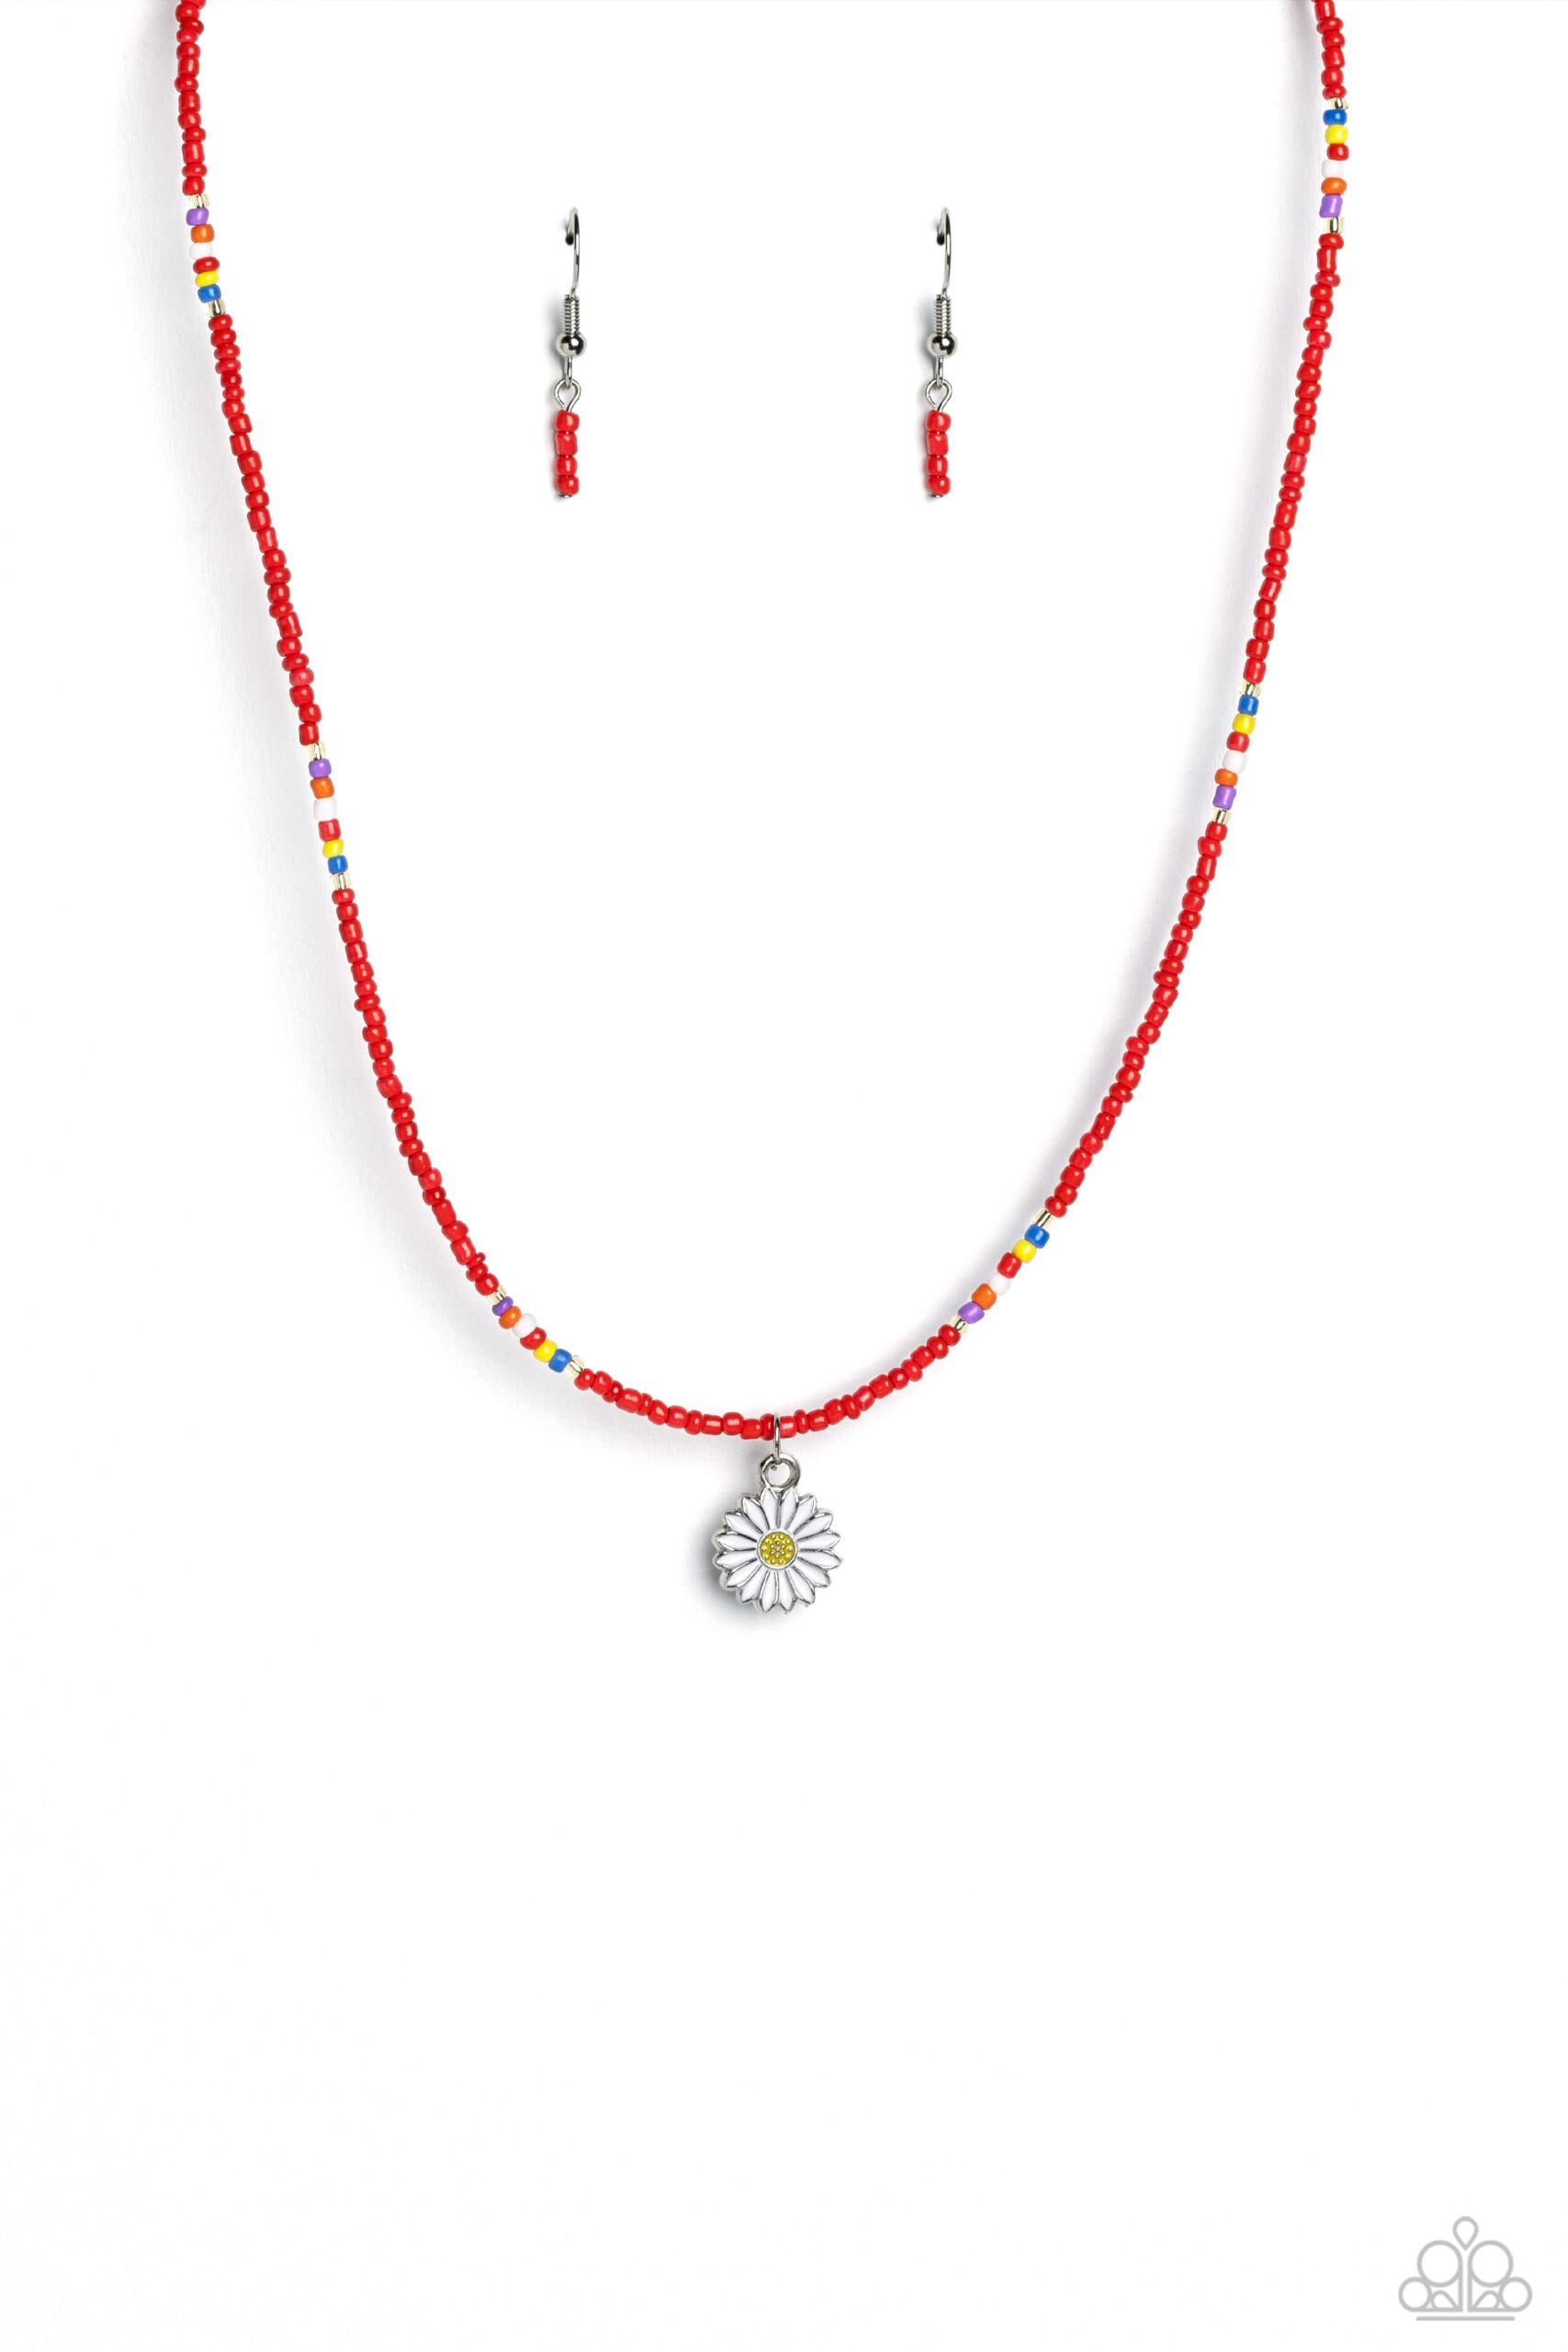 Necklace - Charming Chance - Red Necklace - Charming Chance - Red